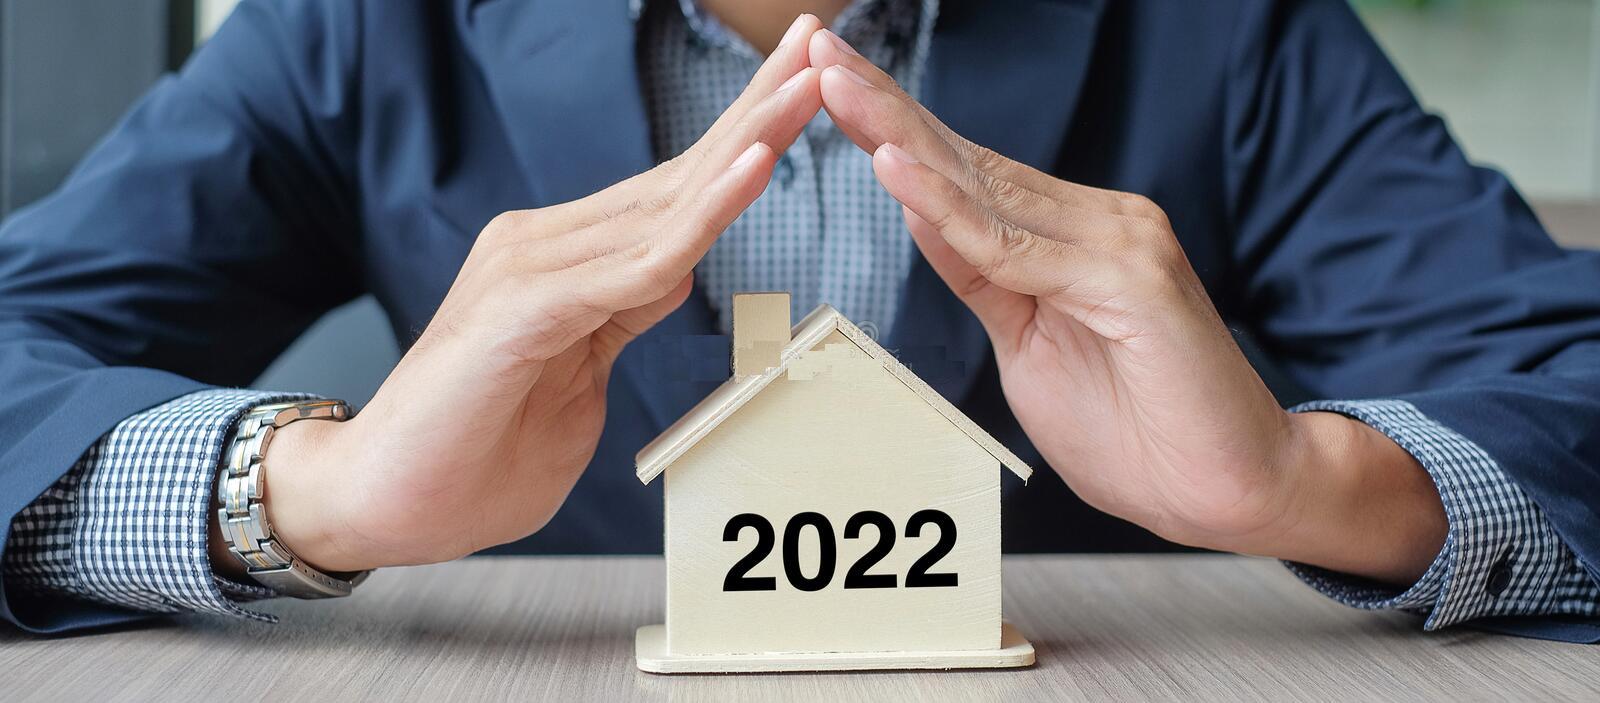 Year 2022 will bring of Great Opportunities for Indian Real Estate Update